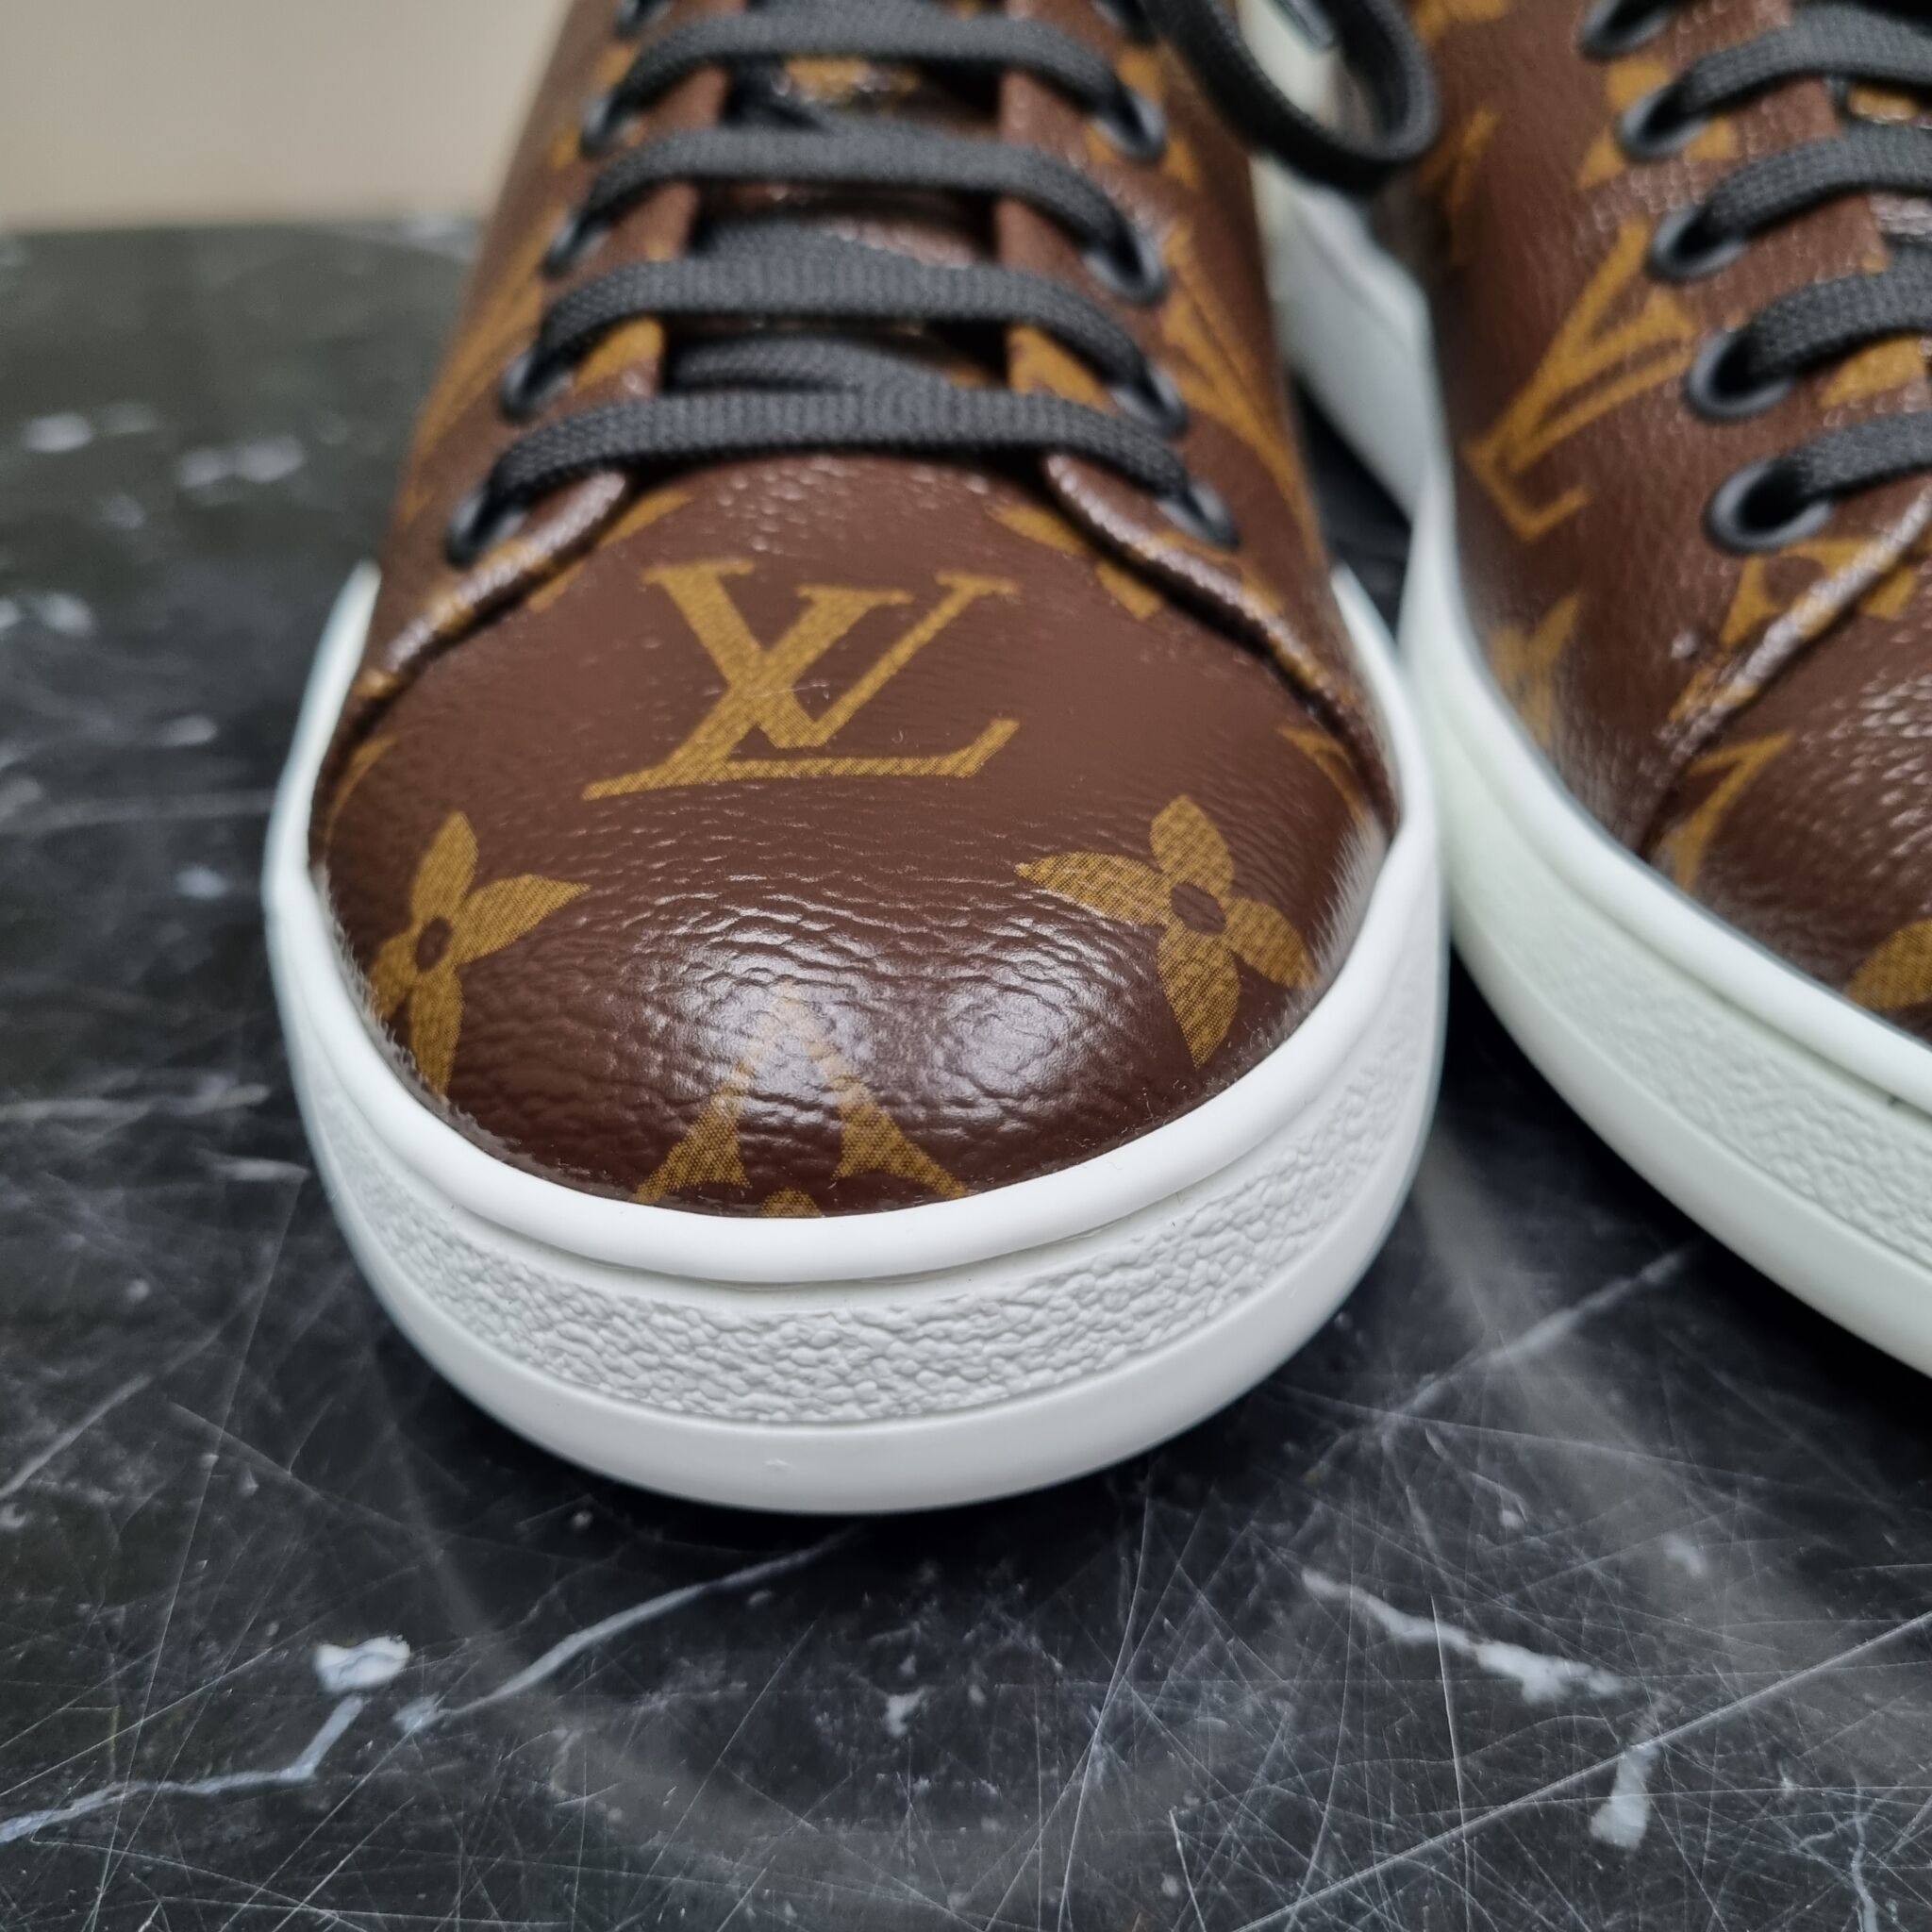 Louis Vuitton Canvas Shoes in Nigeria for sale  Prices on Jijing